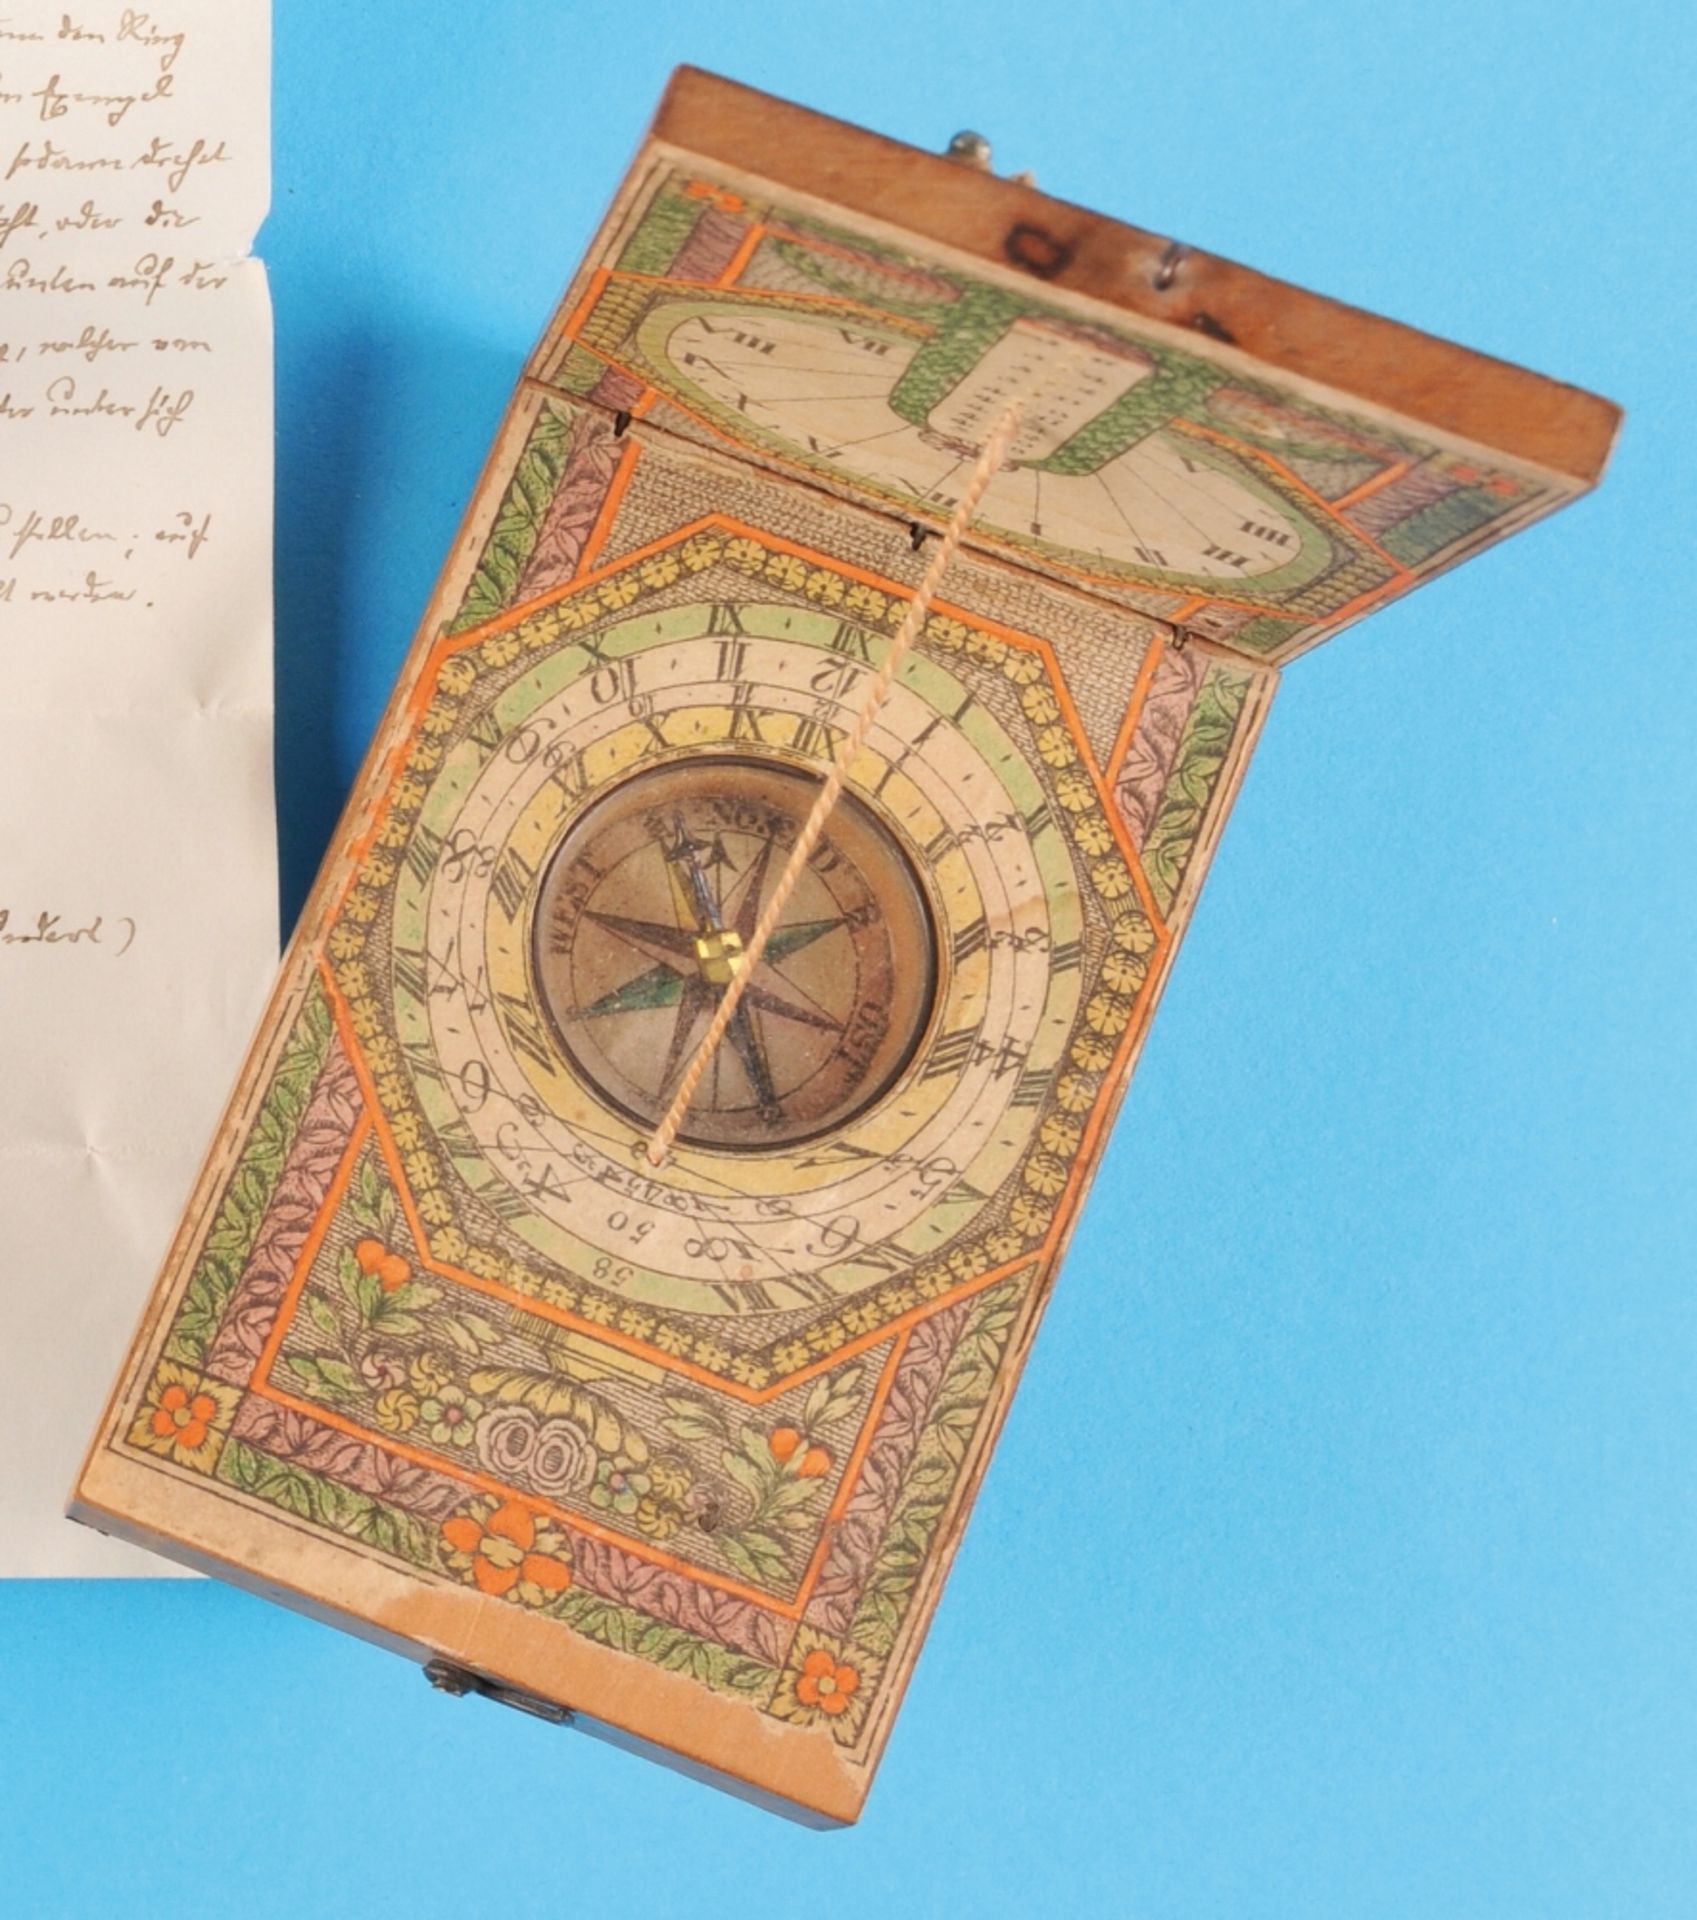 Rectangular wooden folding sundial, 18th century, with colorful paper cover,  